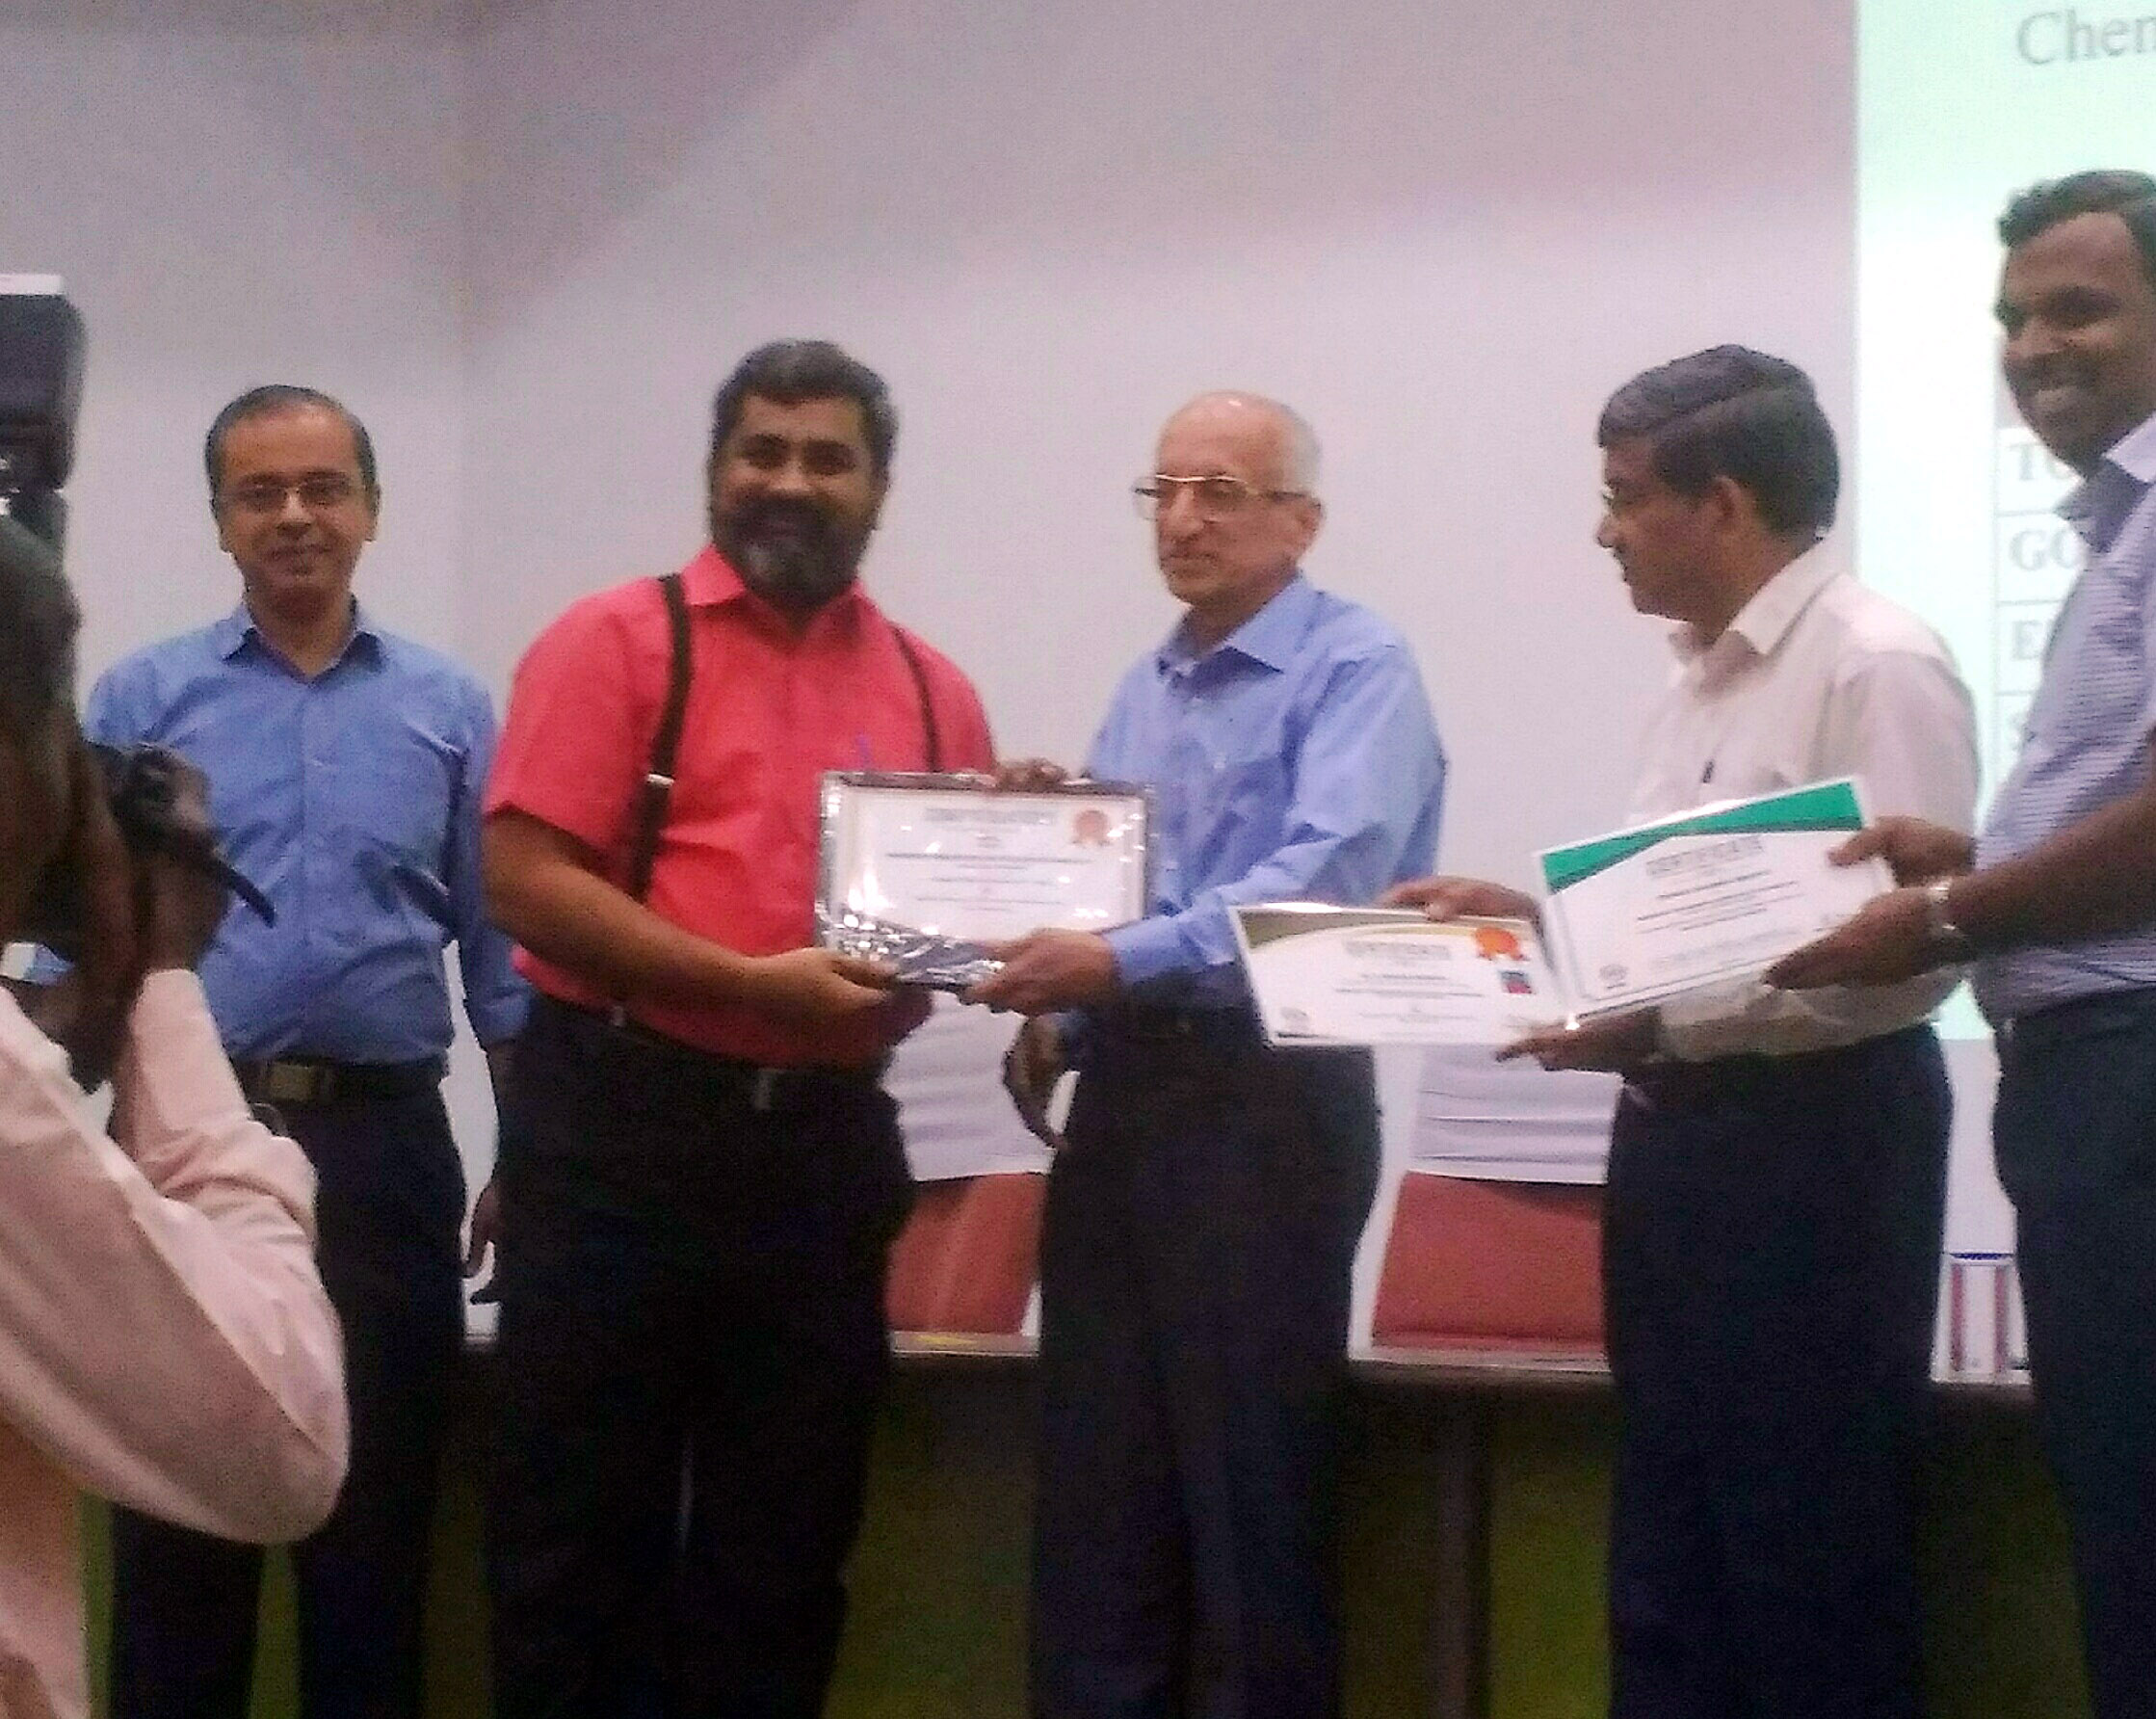 Prof.M.Y.Bhanumurthy of VVIT receiving Plaque and Certification of Appreciation from Prof. Ananth Ex Director IIT Madras